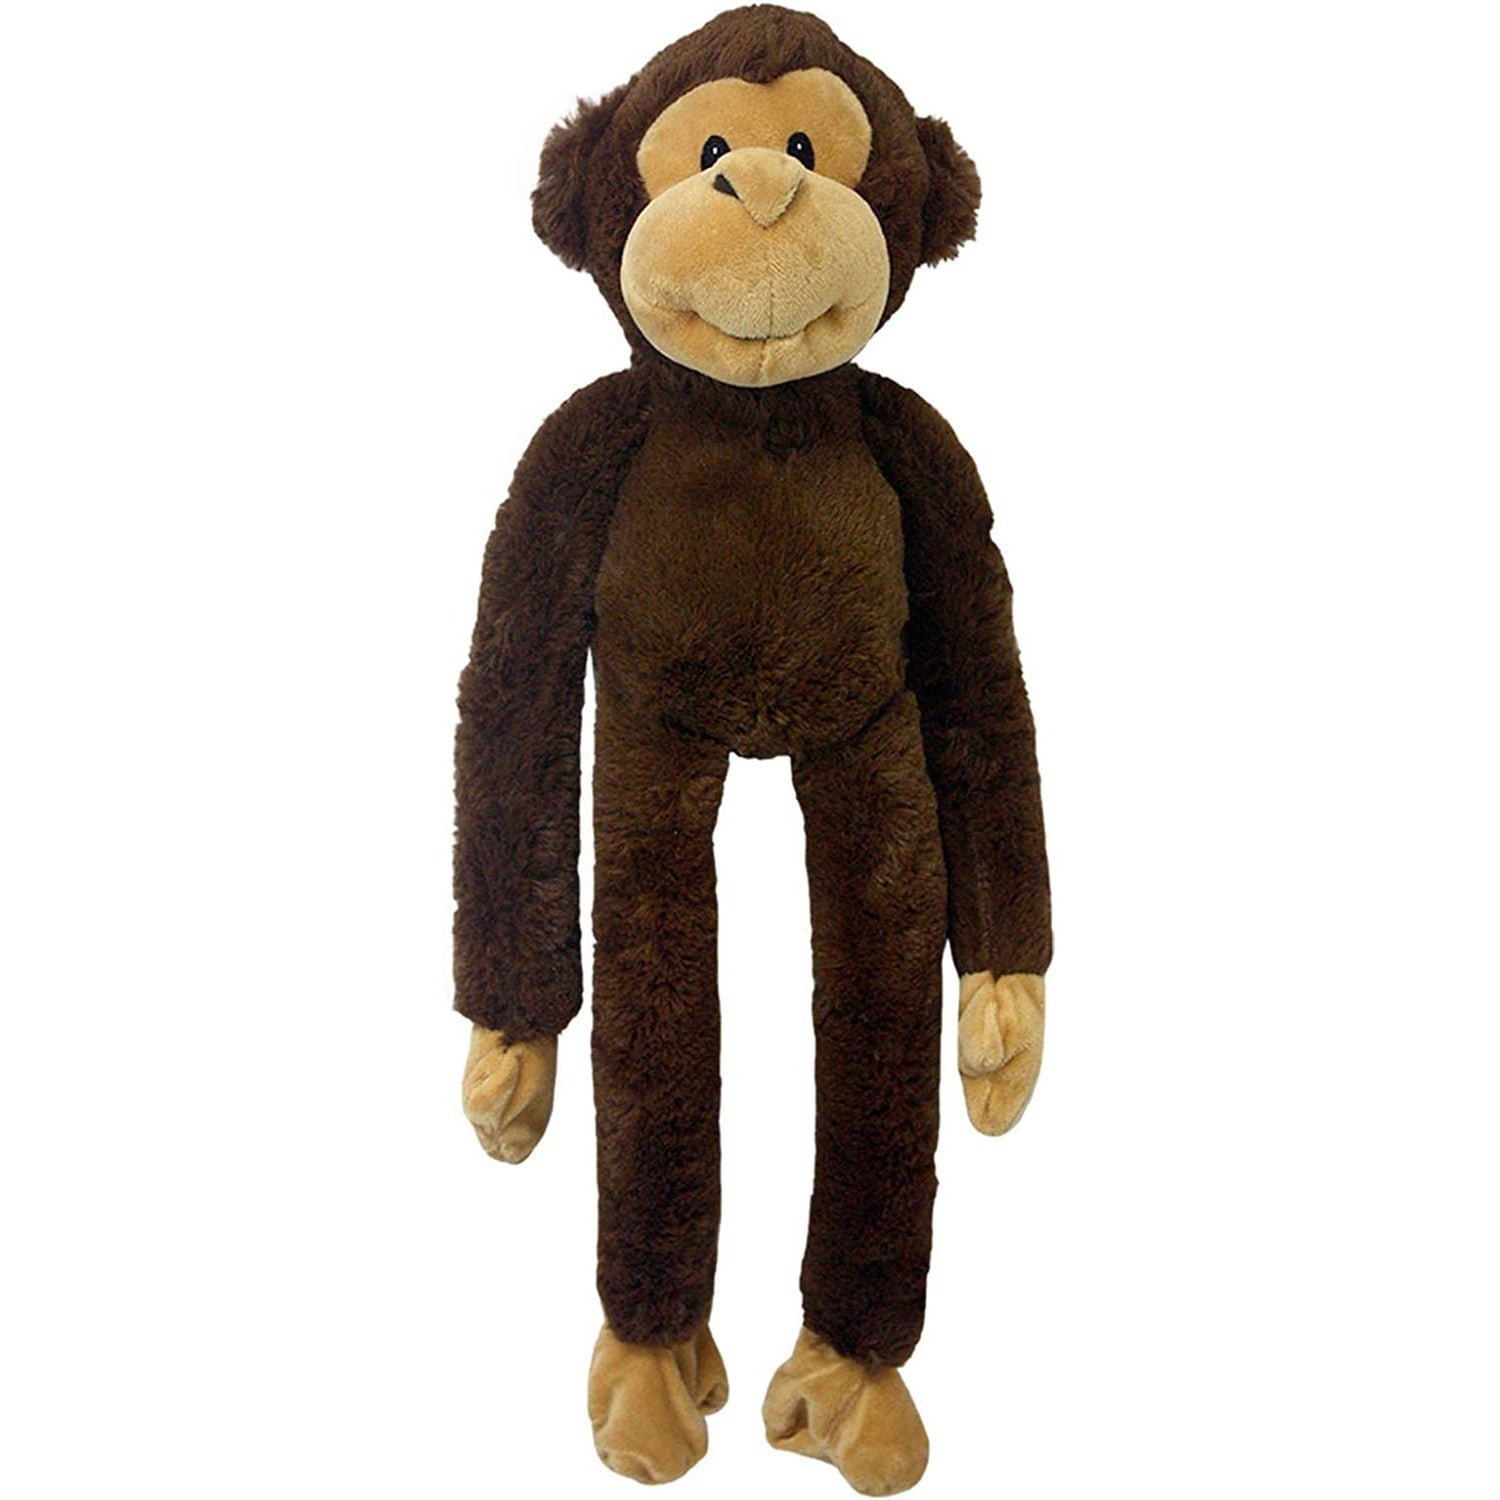 MULTIPET Swingin Safari Monkey Large Plush Dog Toy with Extra Long Arms and Legs with Squeakers, Brown, 22-Inch